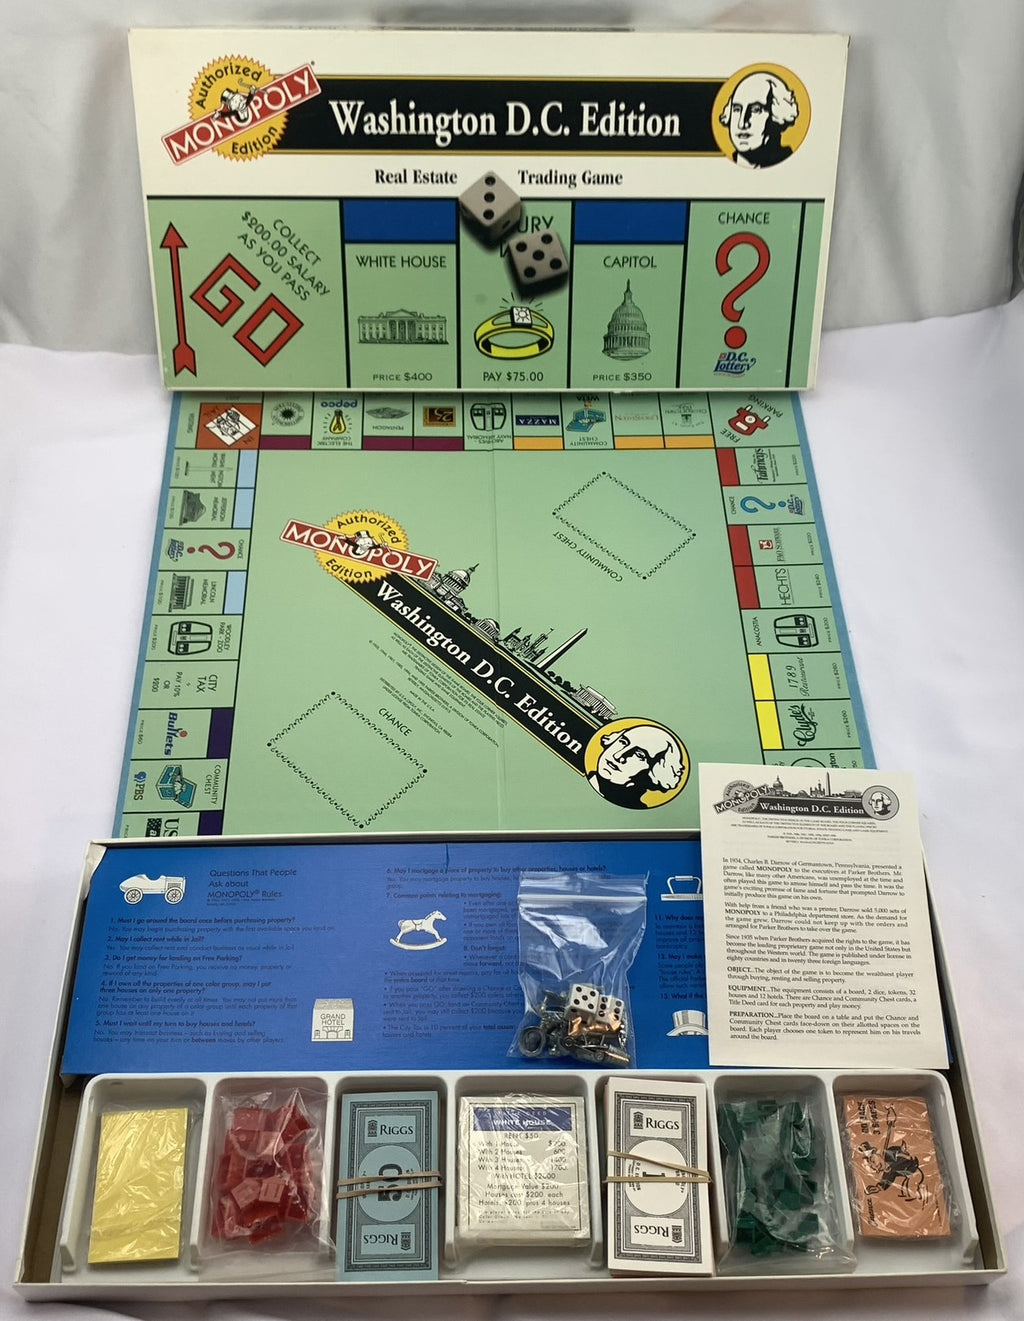 Washington DC Edition Monopoly Game - 1995 - USAopoly - Great Condition